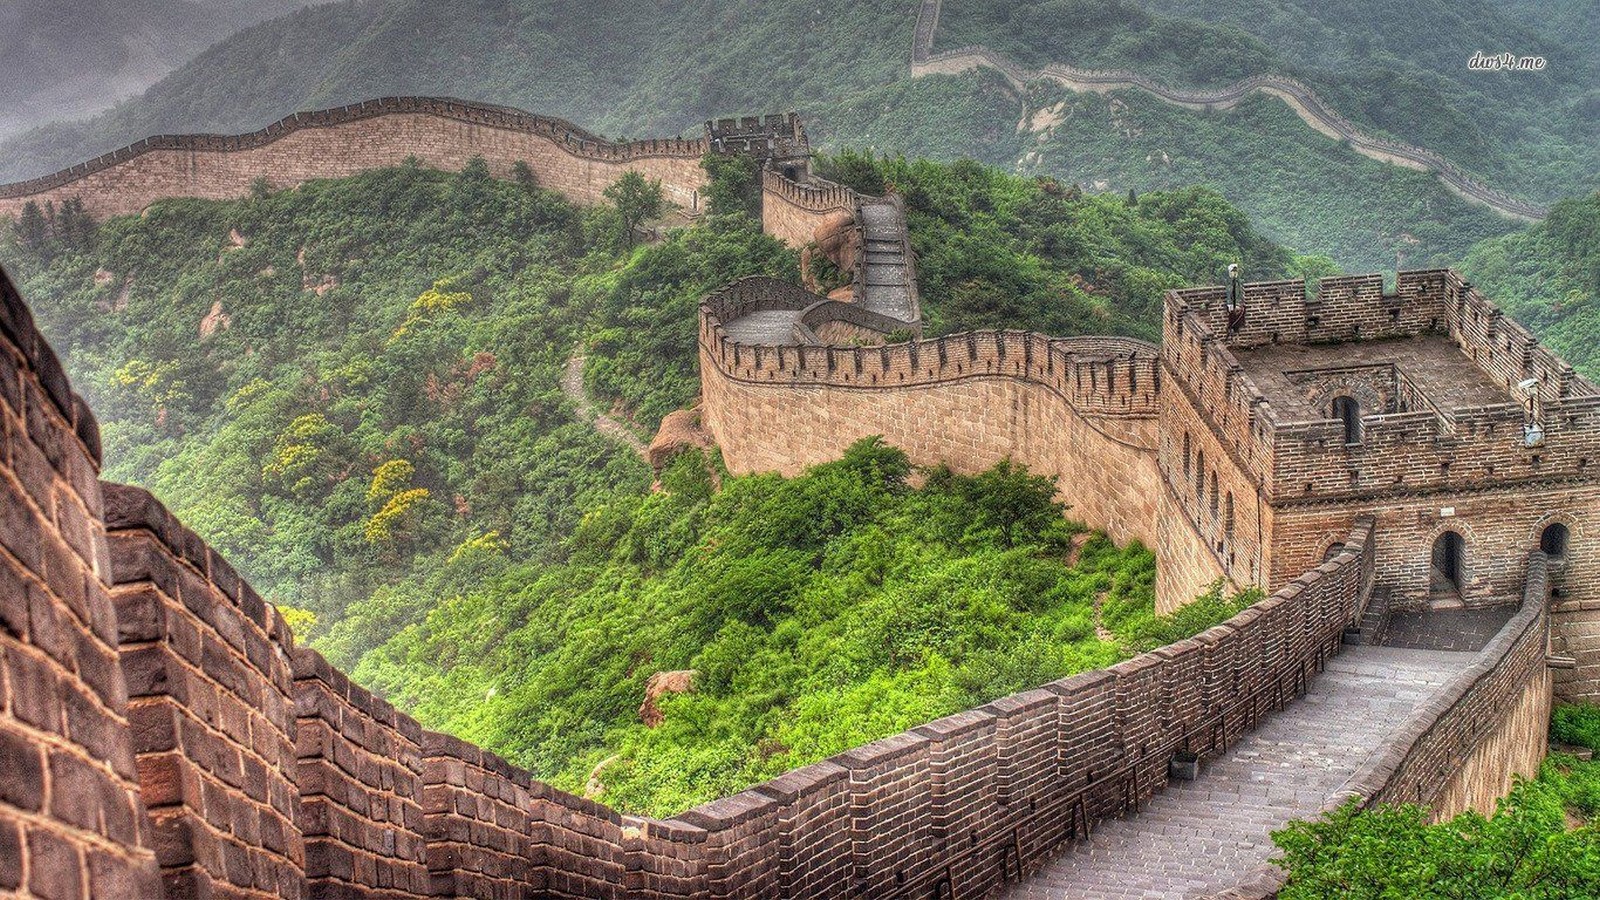 Historicity in Architecture - The Great Wall of China - Sheet1